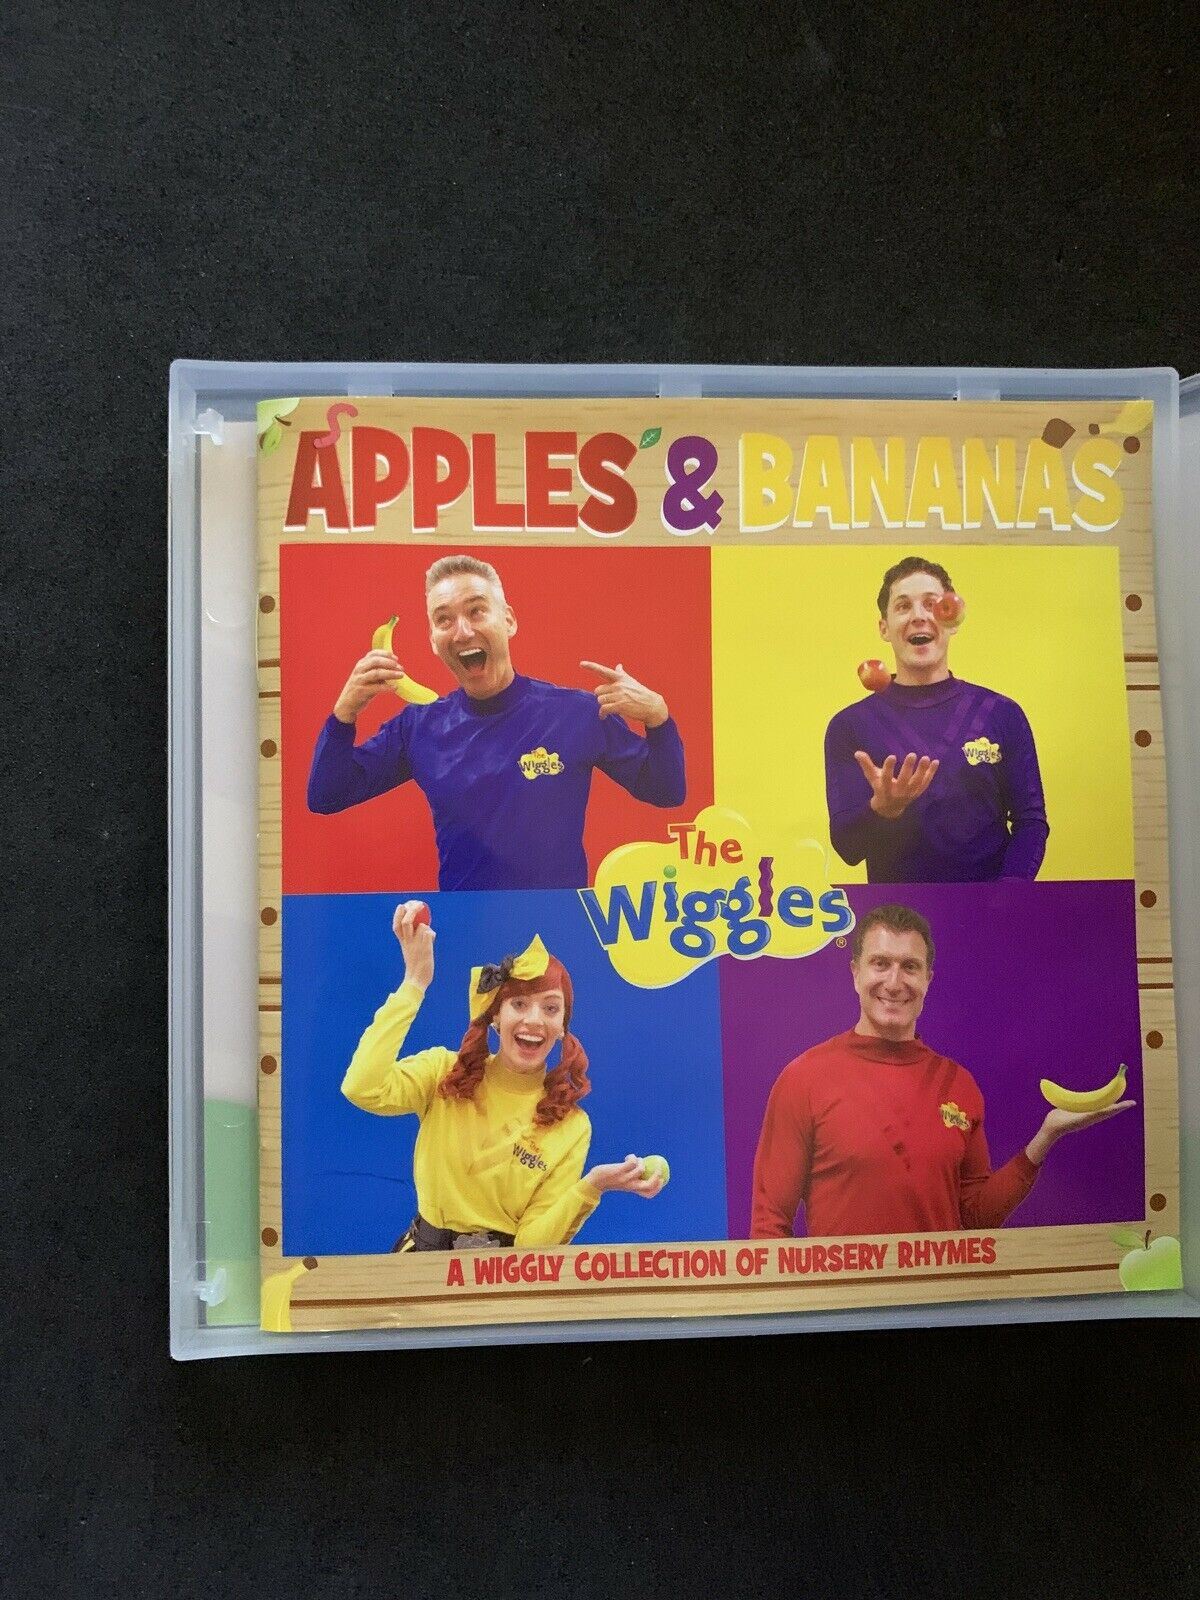 Apples & Bananas by The Wiggles (CD, ABC) A Wiggly Collection of Nursery Rhymes